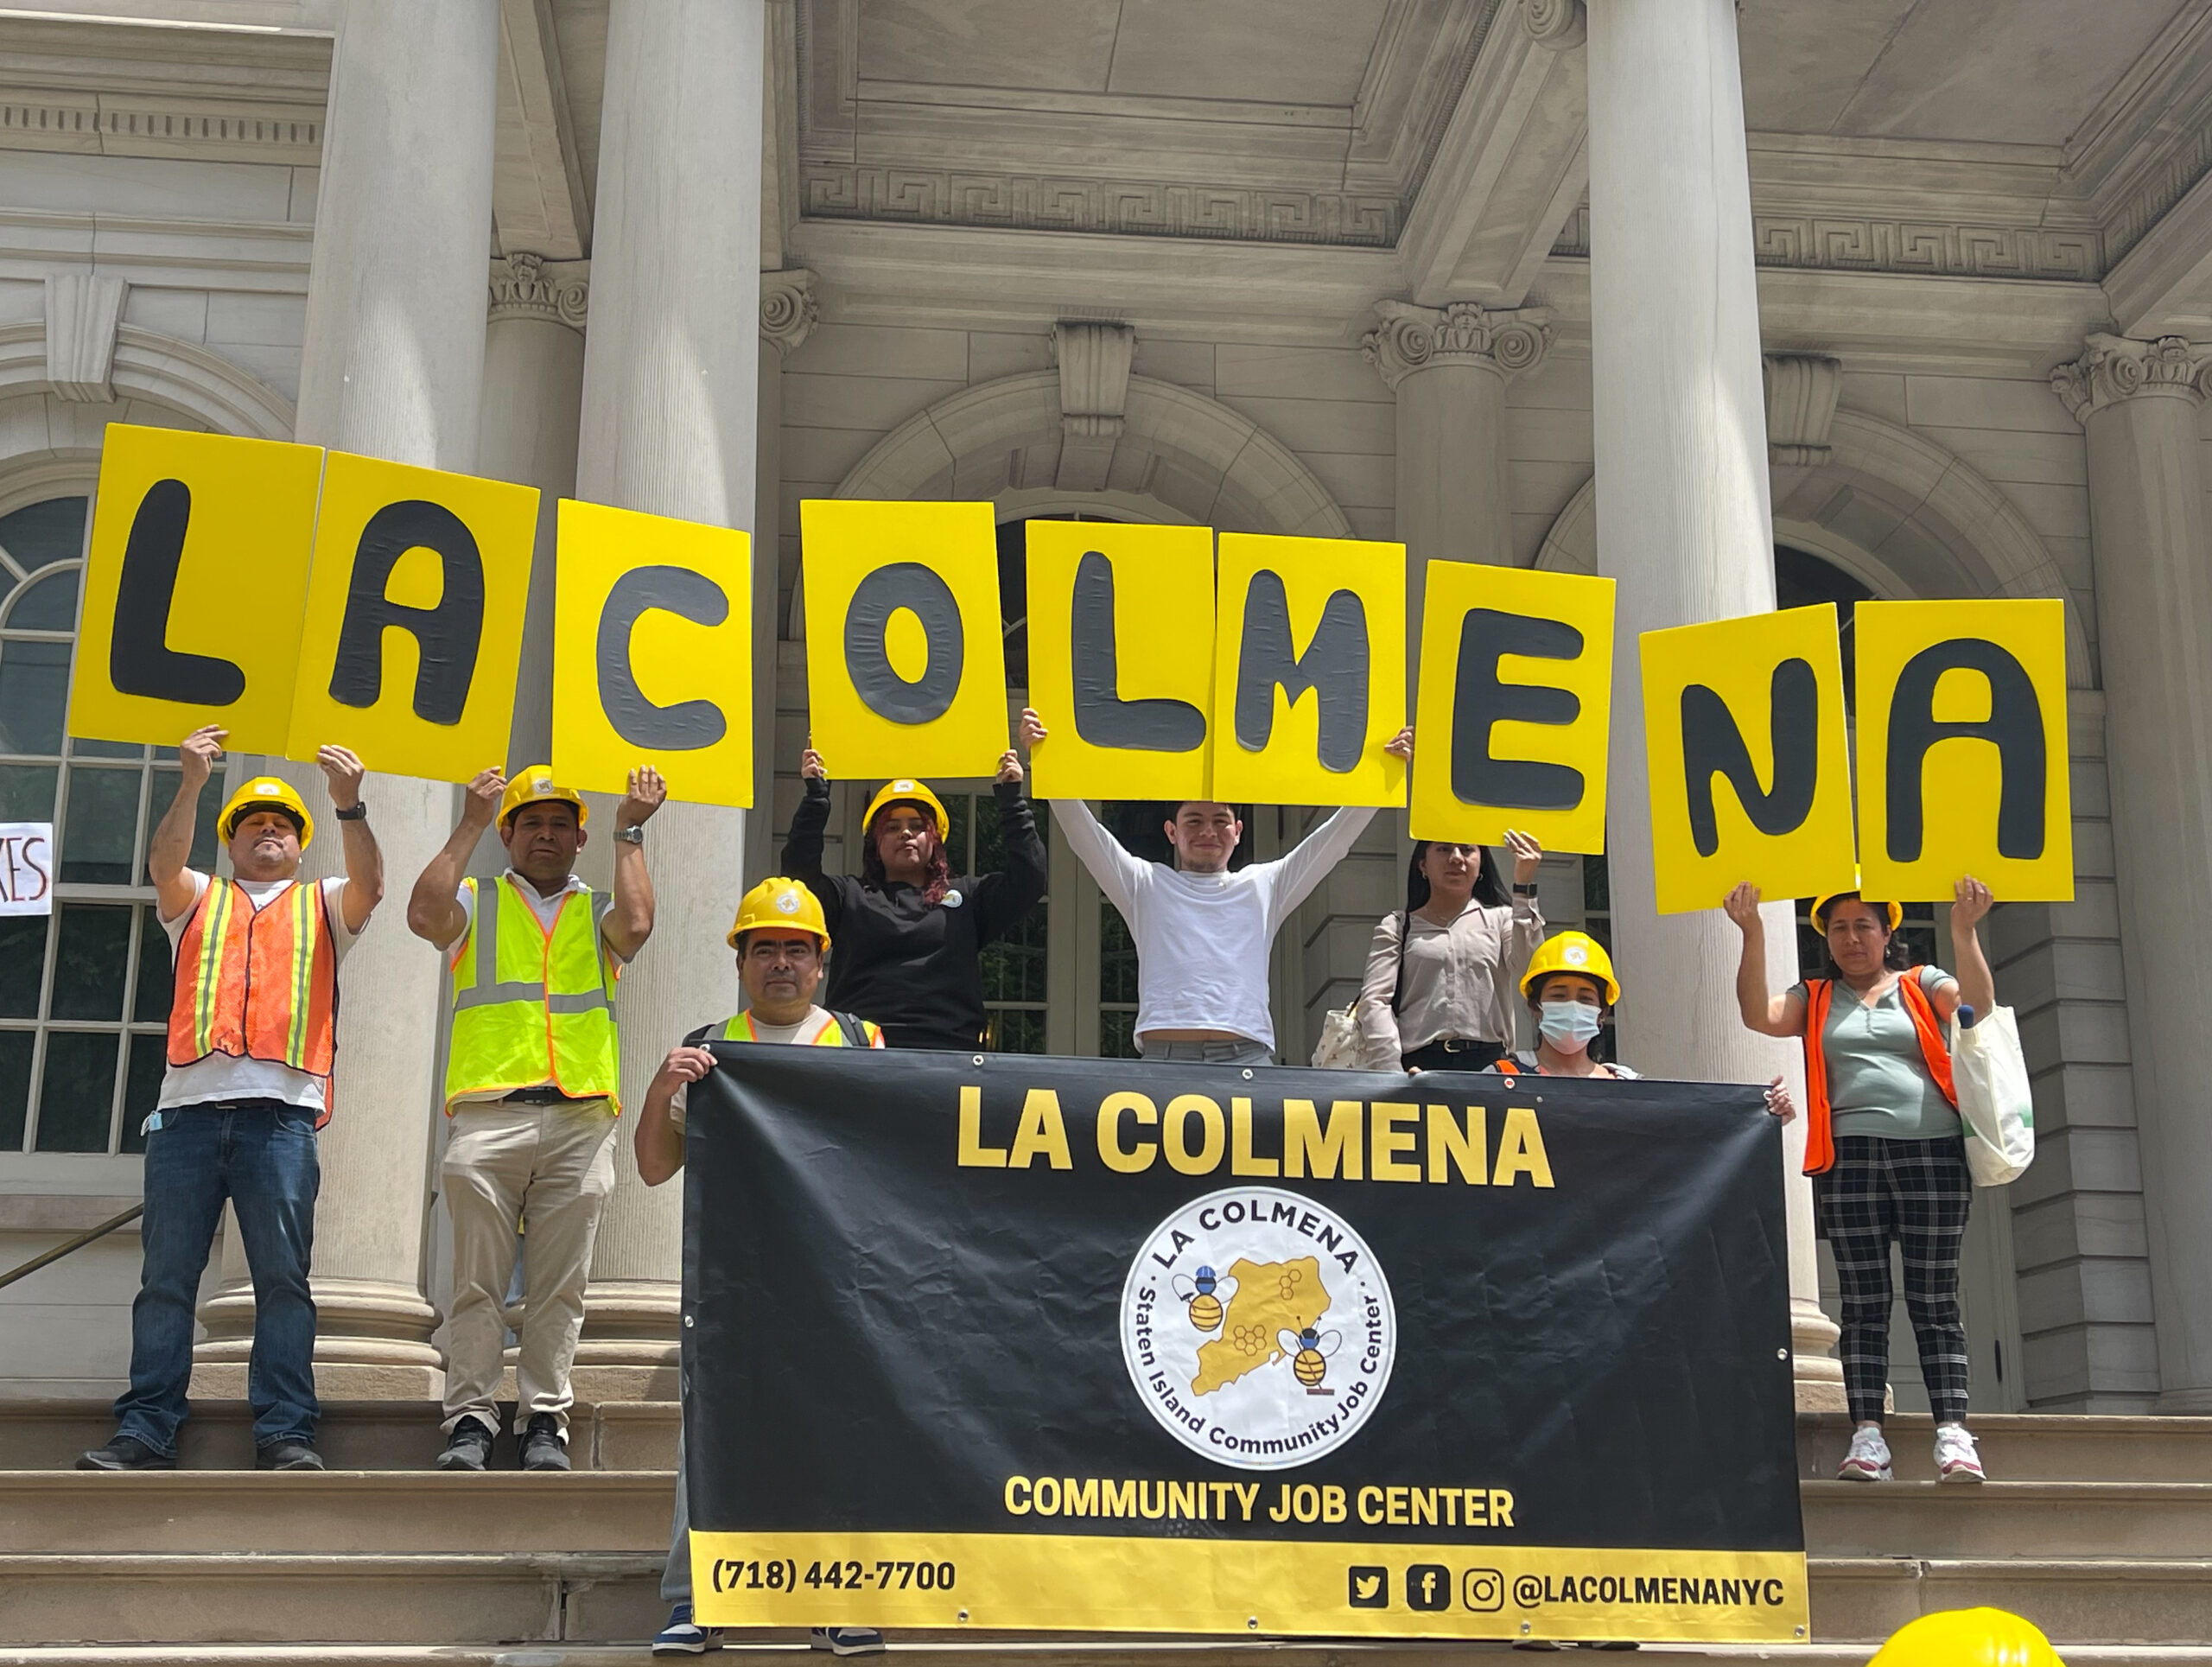 Members of La Colmena stand outside the steps of a government building holding signs that read "La Colmena"